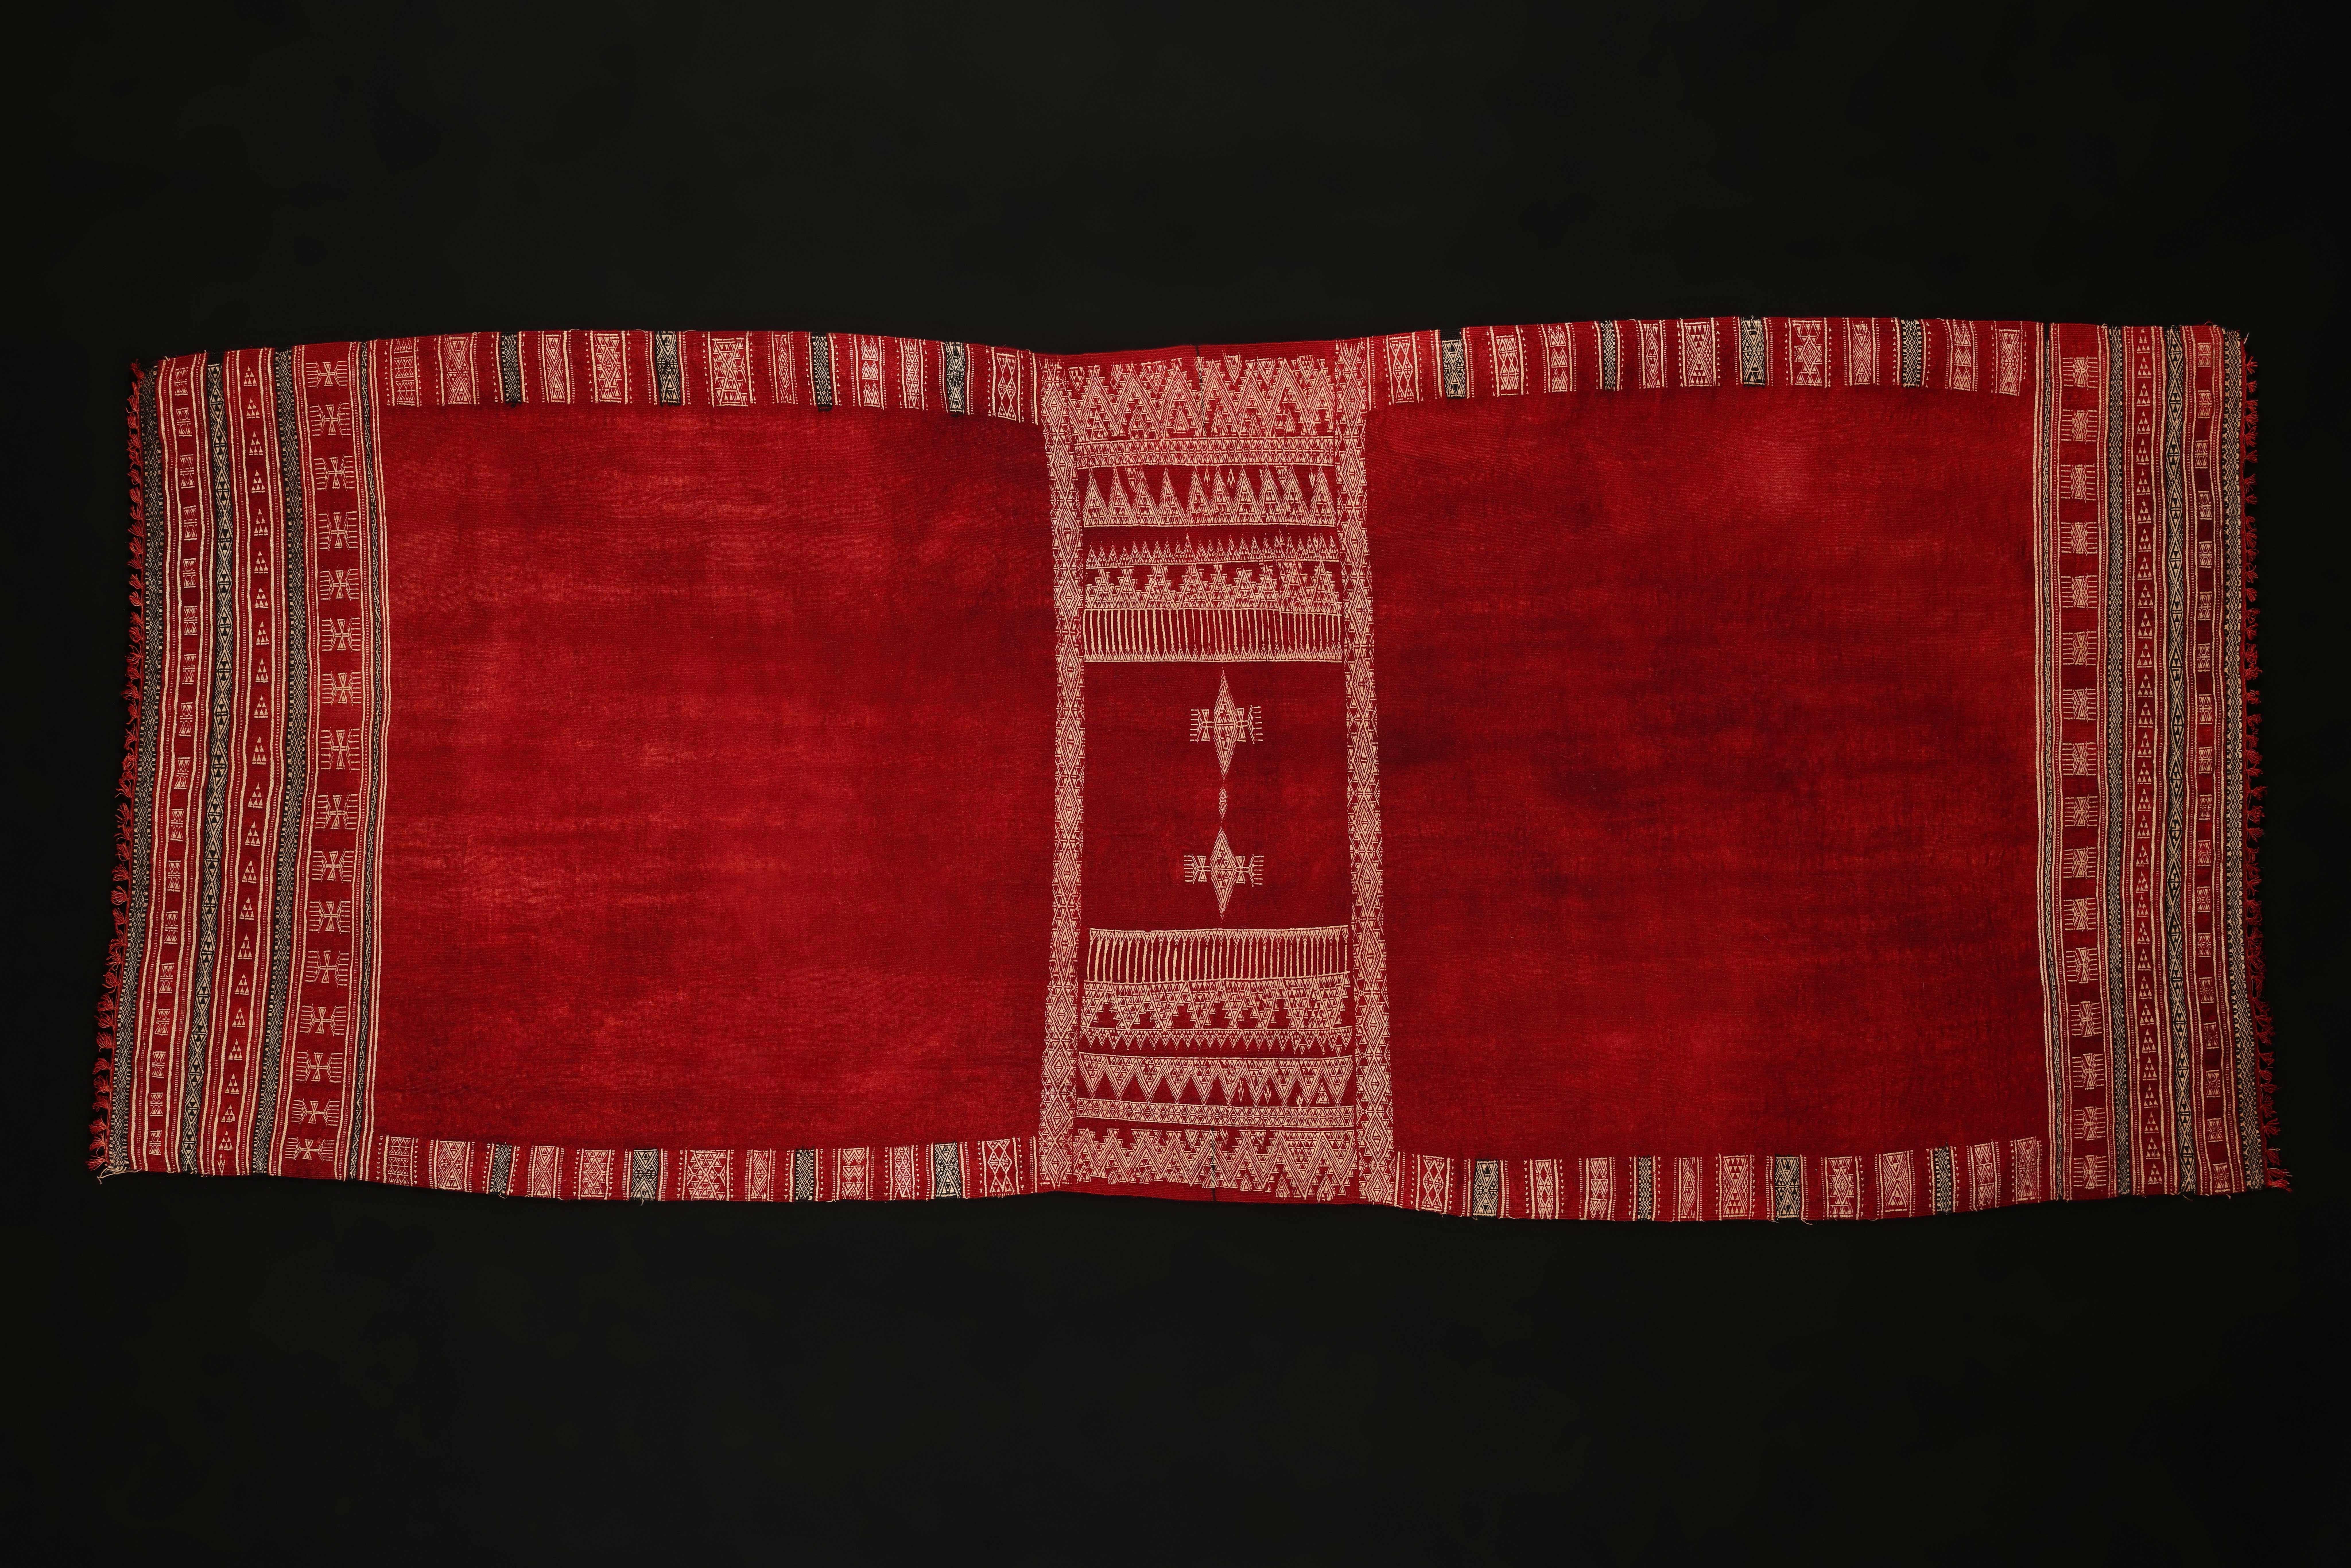 Woman’s Cover, Bakhnouk
Berber people, Matmata Mountains, Tunisia
Early 20th century
Wool, cotton, natural and synthetic dyes (?)  Supplementary patterning
Dyed after being woven which creates the rich variagated tones of crimson red.
The cotton